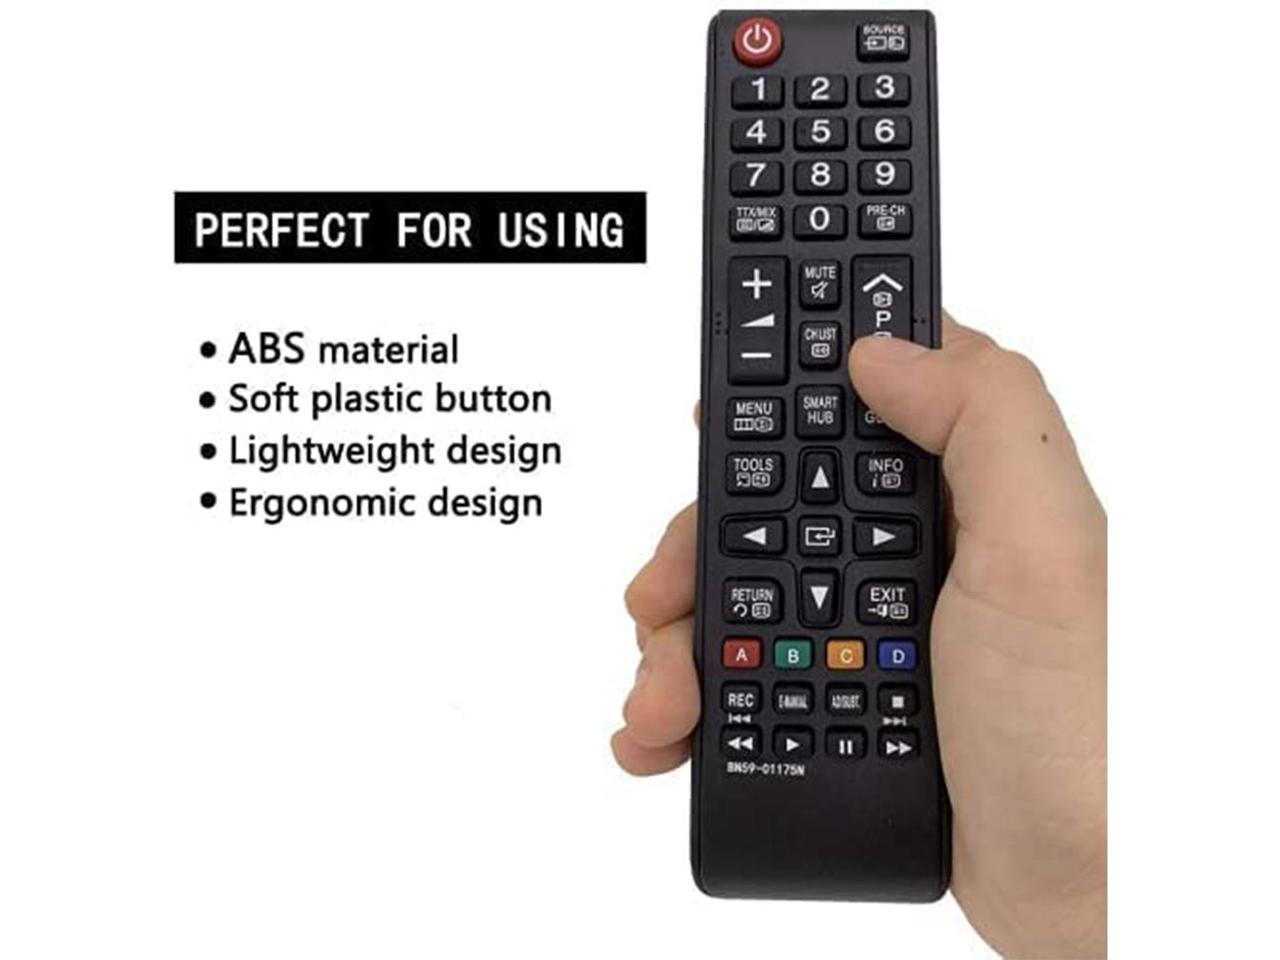 Universal Remote Control For Samsung Bn64 01939a 00 And All Other Samsung Smart Tv Models Lcd 1295